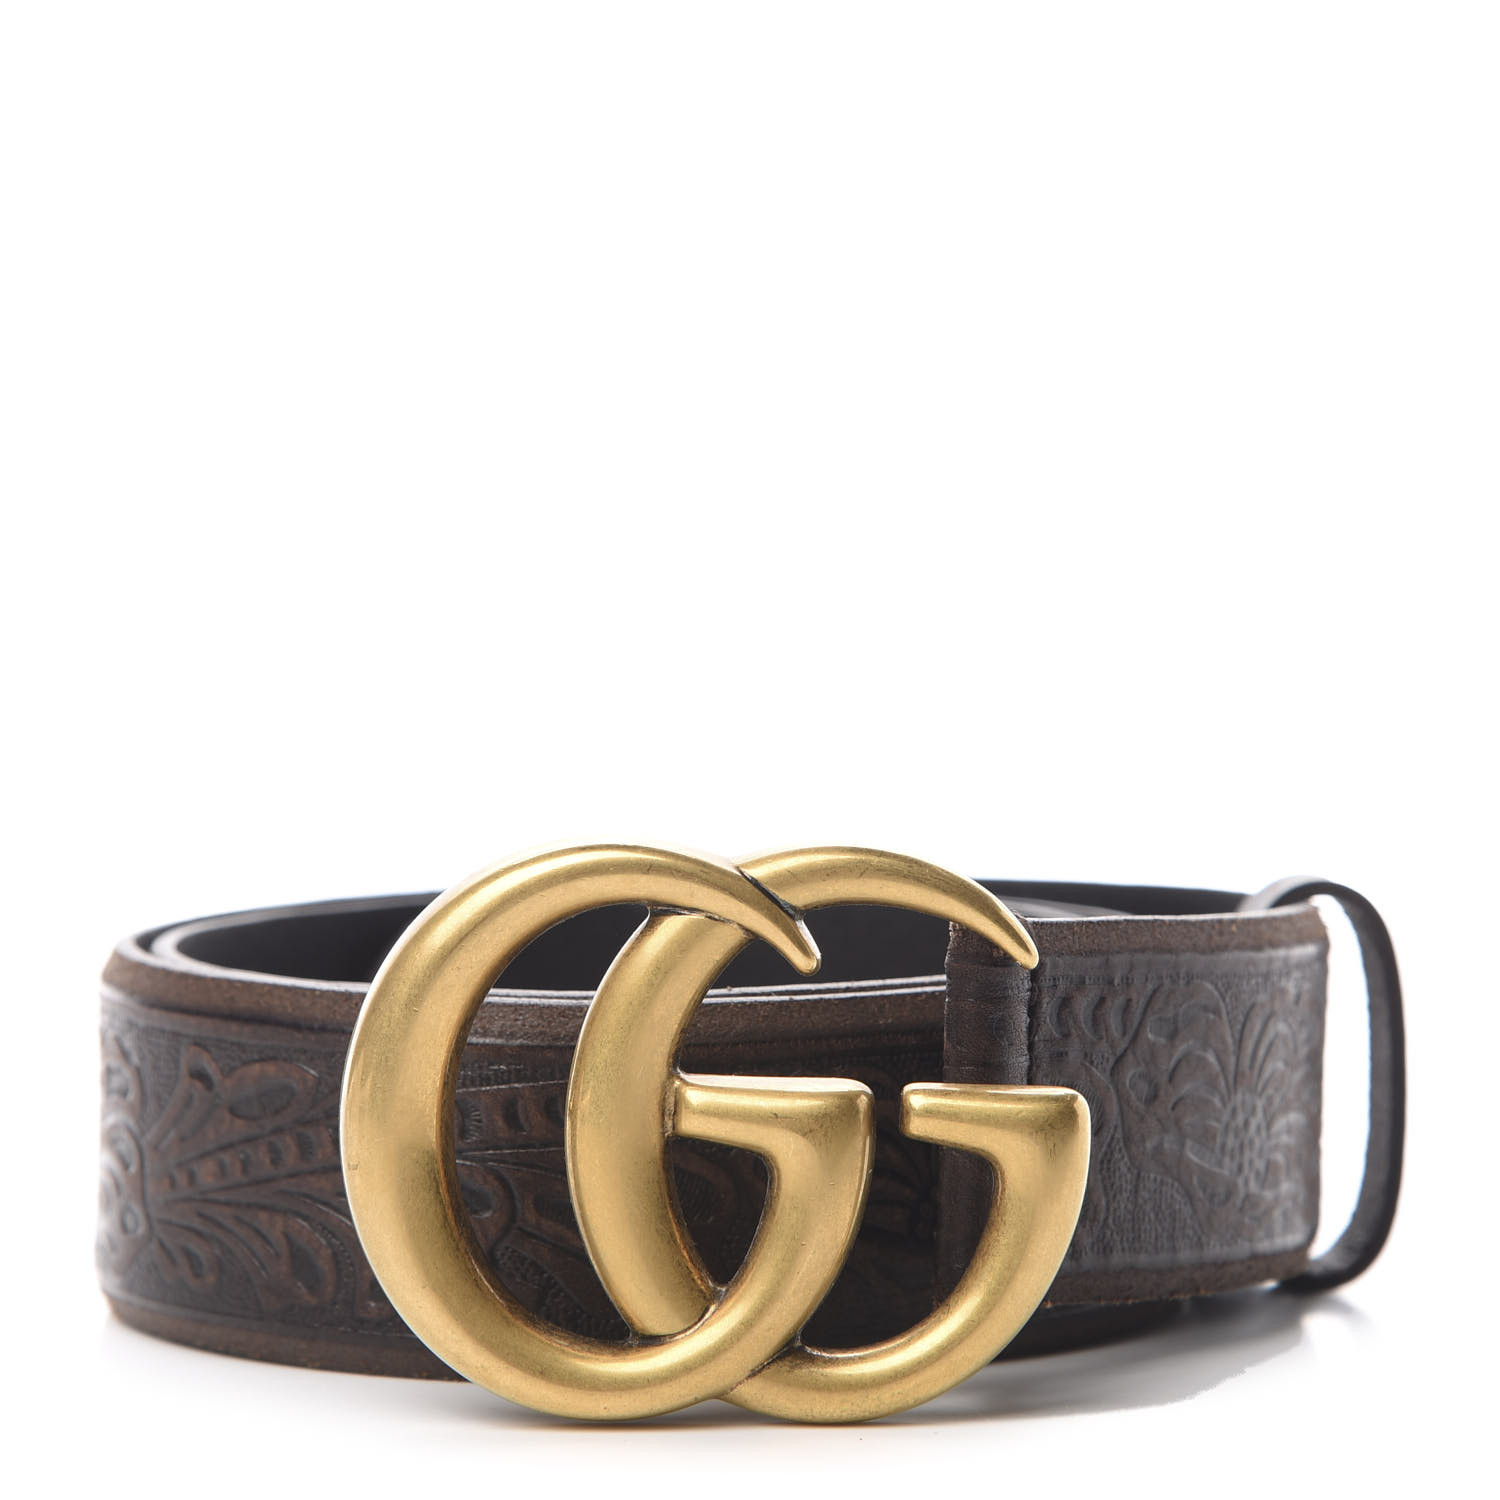 GUCCI Calfskin Embossed Double G Belt 80 32 Brown 608694